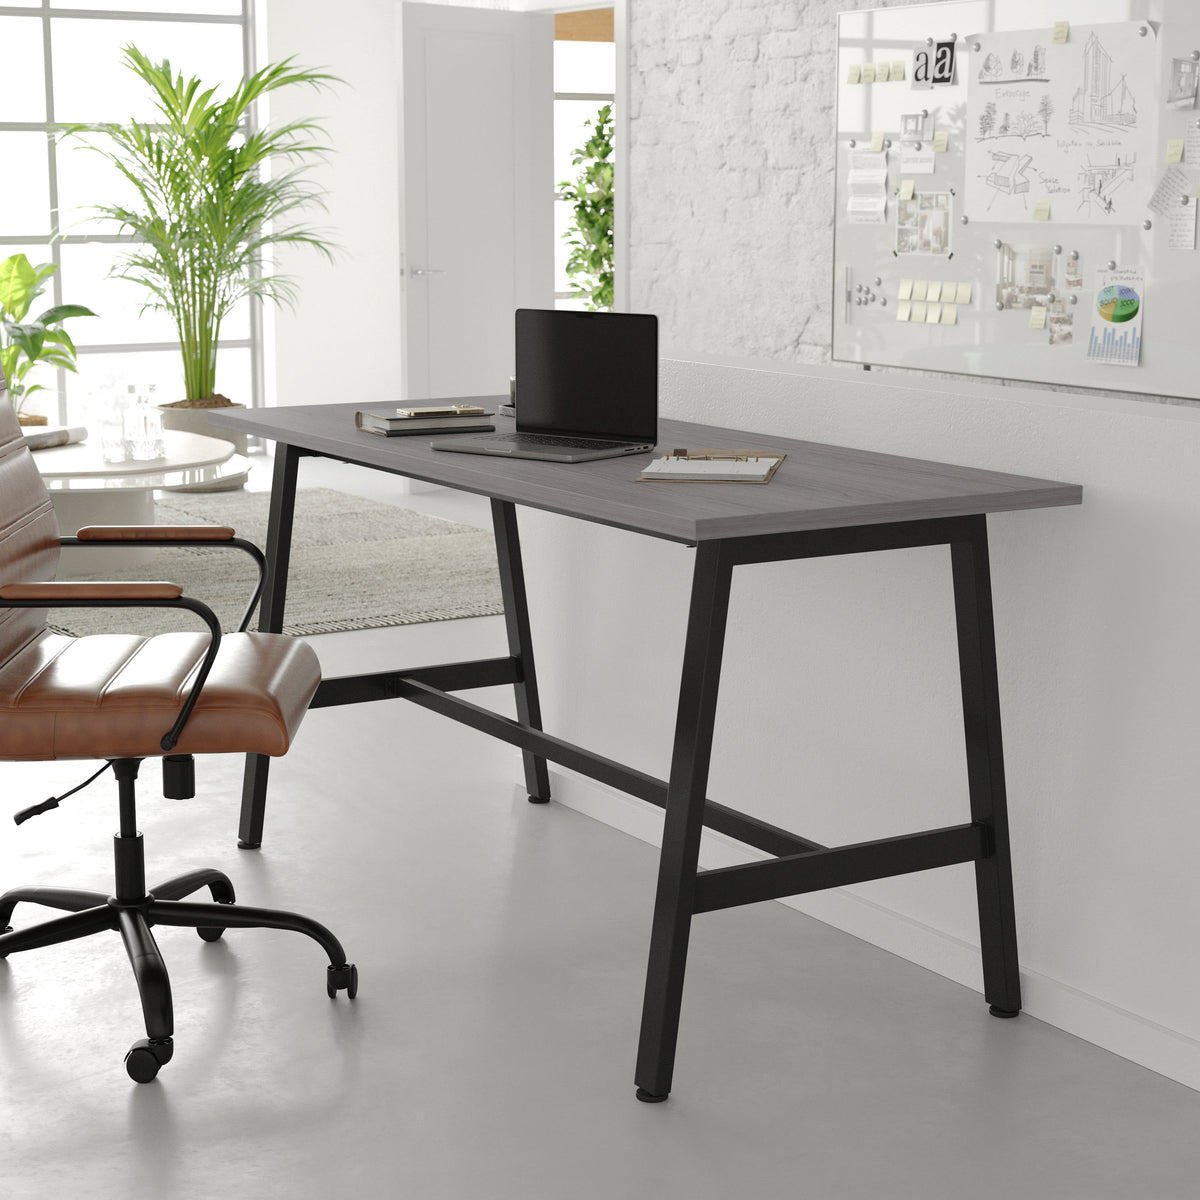 Gray Oak |#| Commercial 60x24 Conference Table with Laminate Top and A-Frame Base - Gray Oak